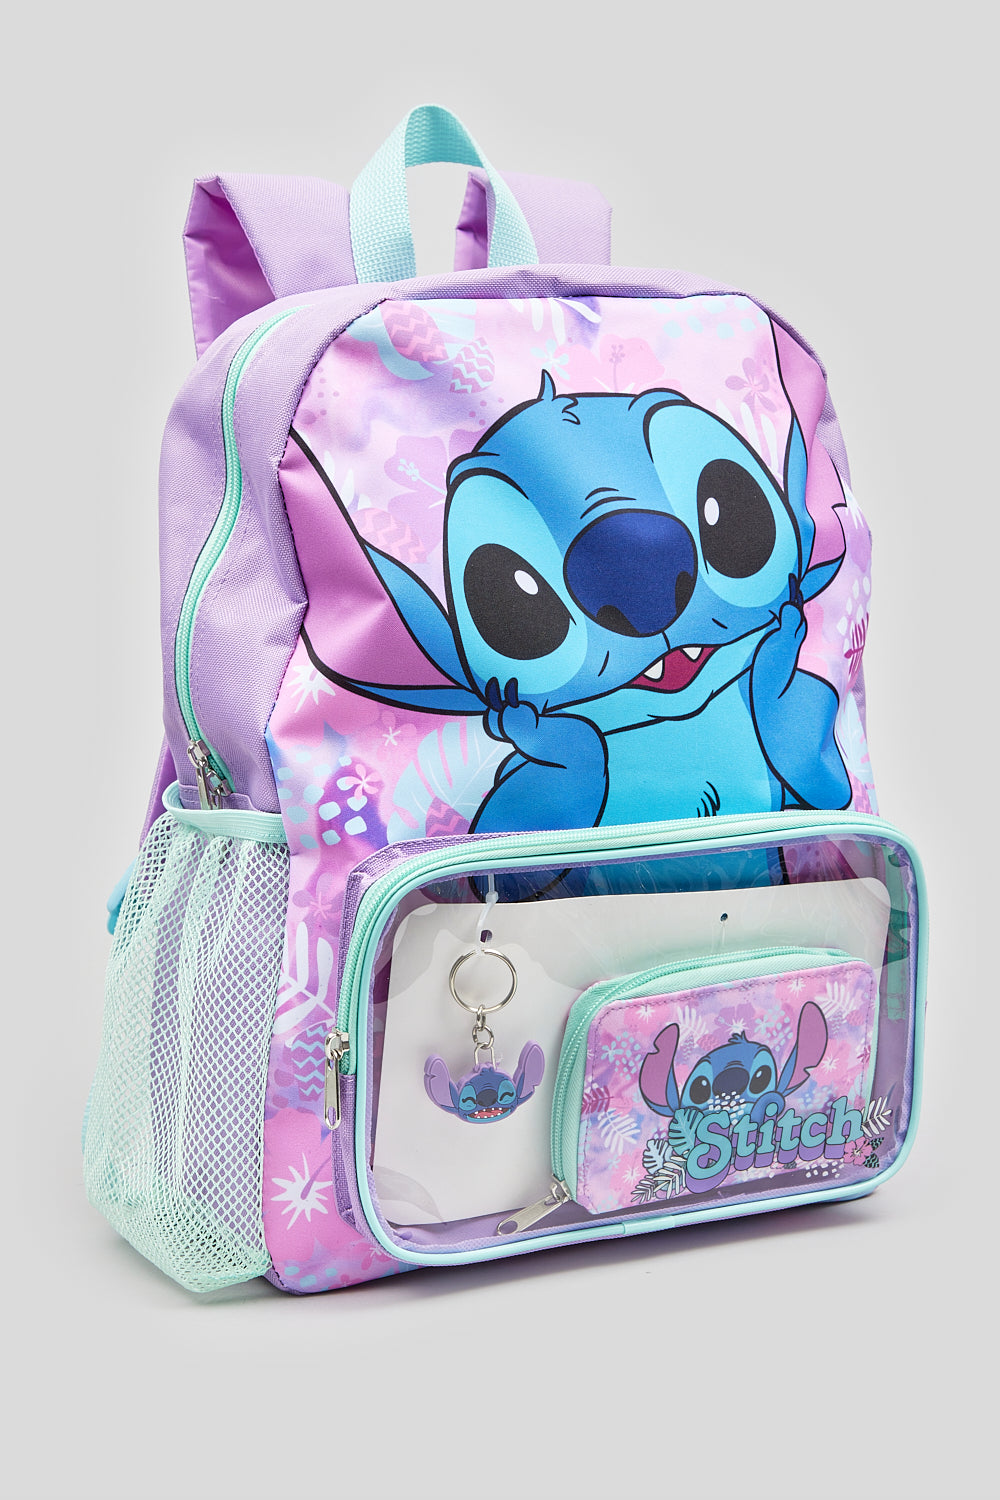 Lilo & Stitch Crossbody Hand Shoulder Bags Tote Plush Toy Messenger Purse  Bag on OnBuy